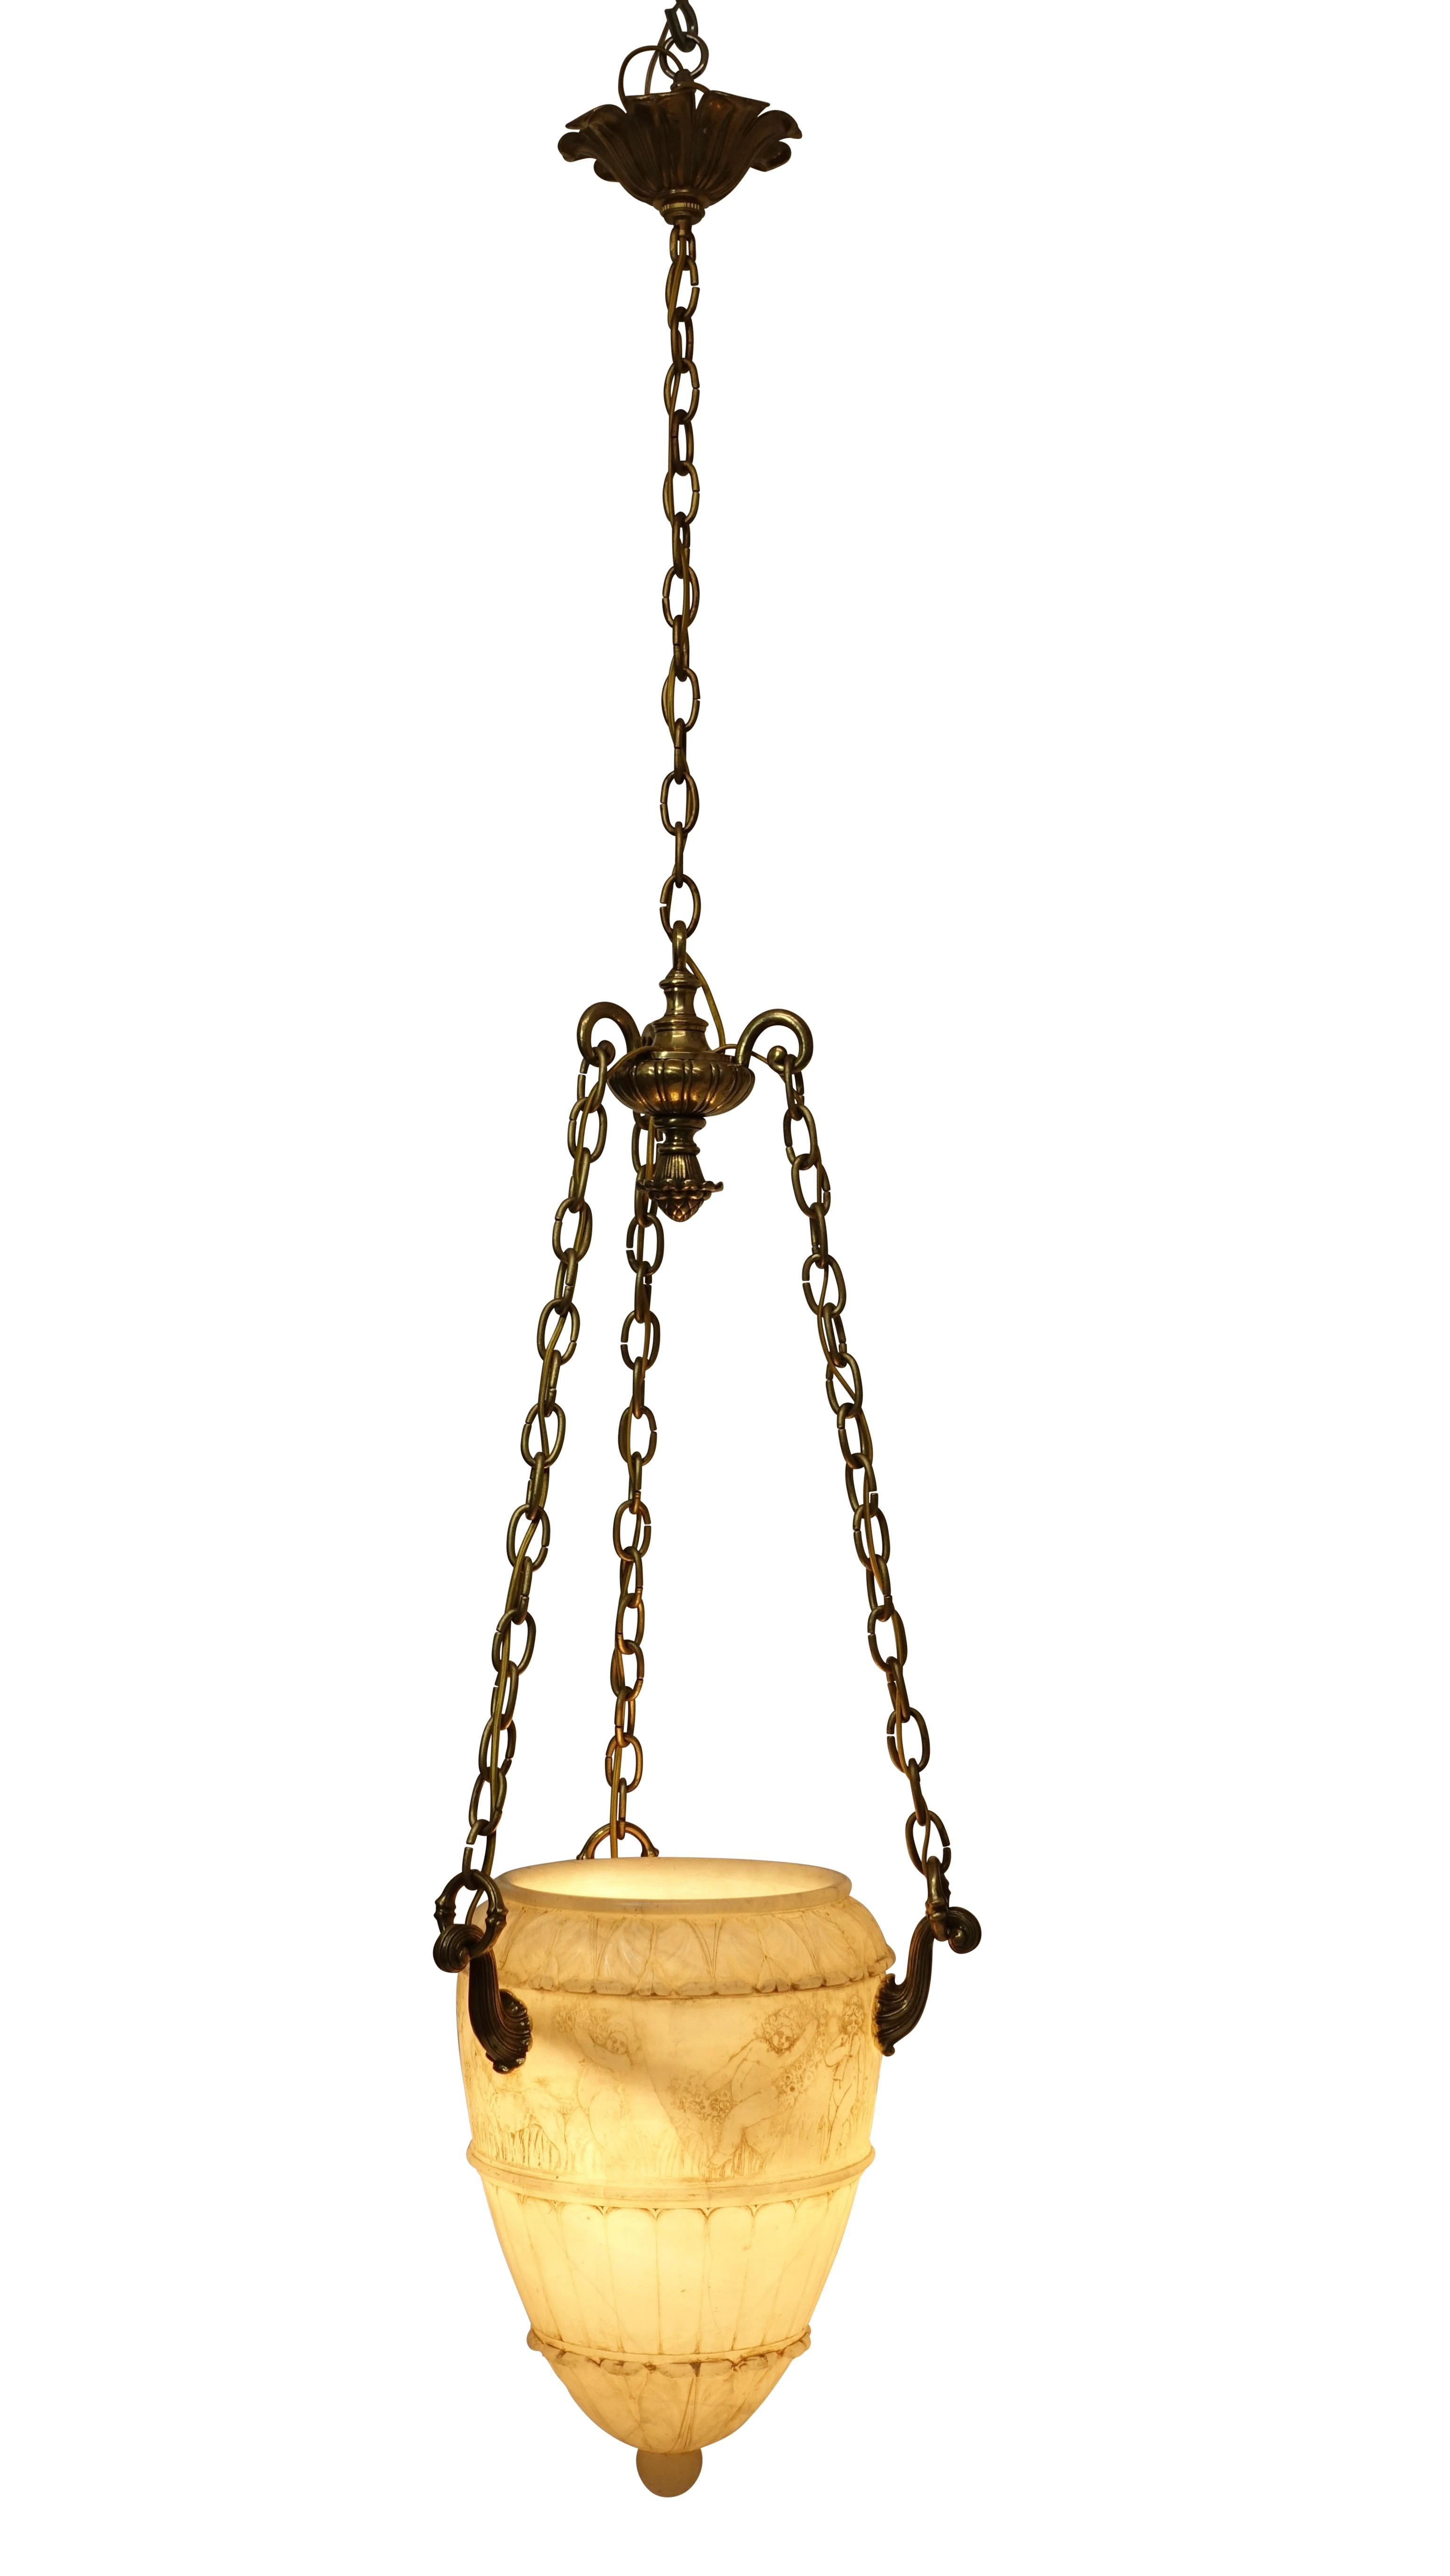 A unique alabaster drop pendant light fixture. Hand-carved with cherubs and goats below an egg and dart carved rim above a fluted body and ending with a knob finial. Having brass chain and canopy, length can be shortened if desired. Recently